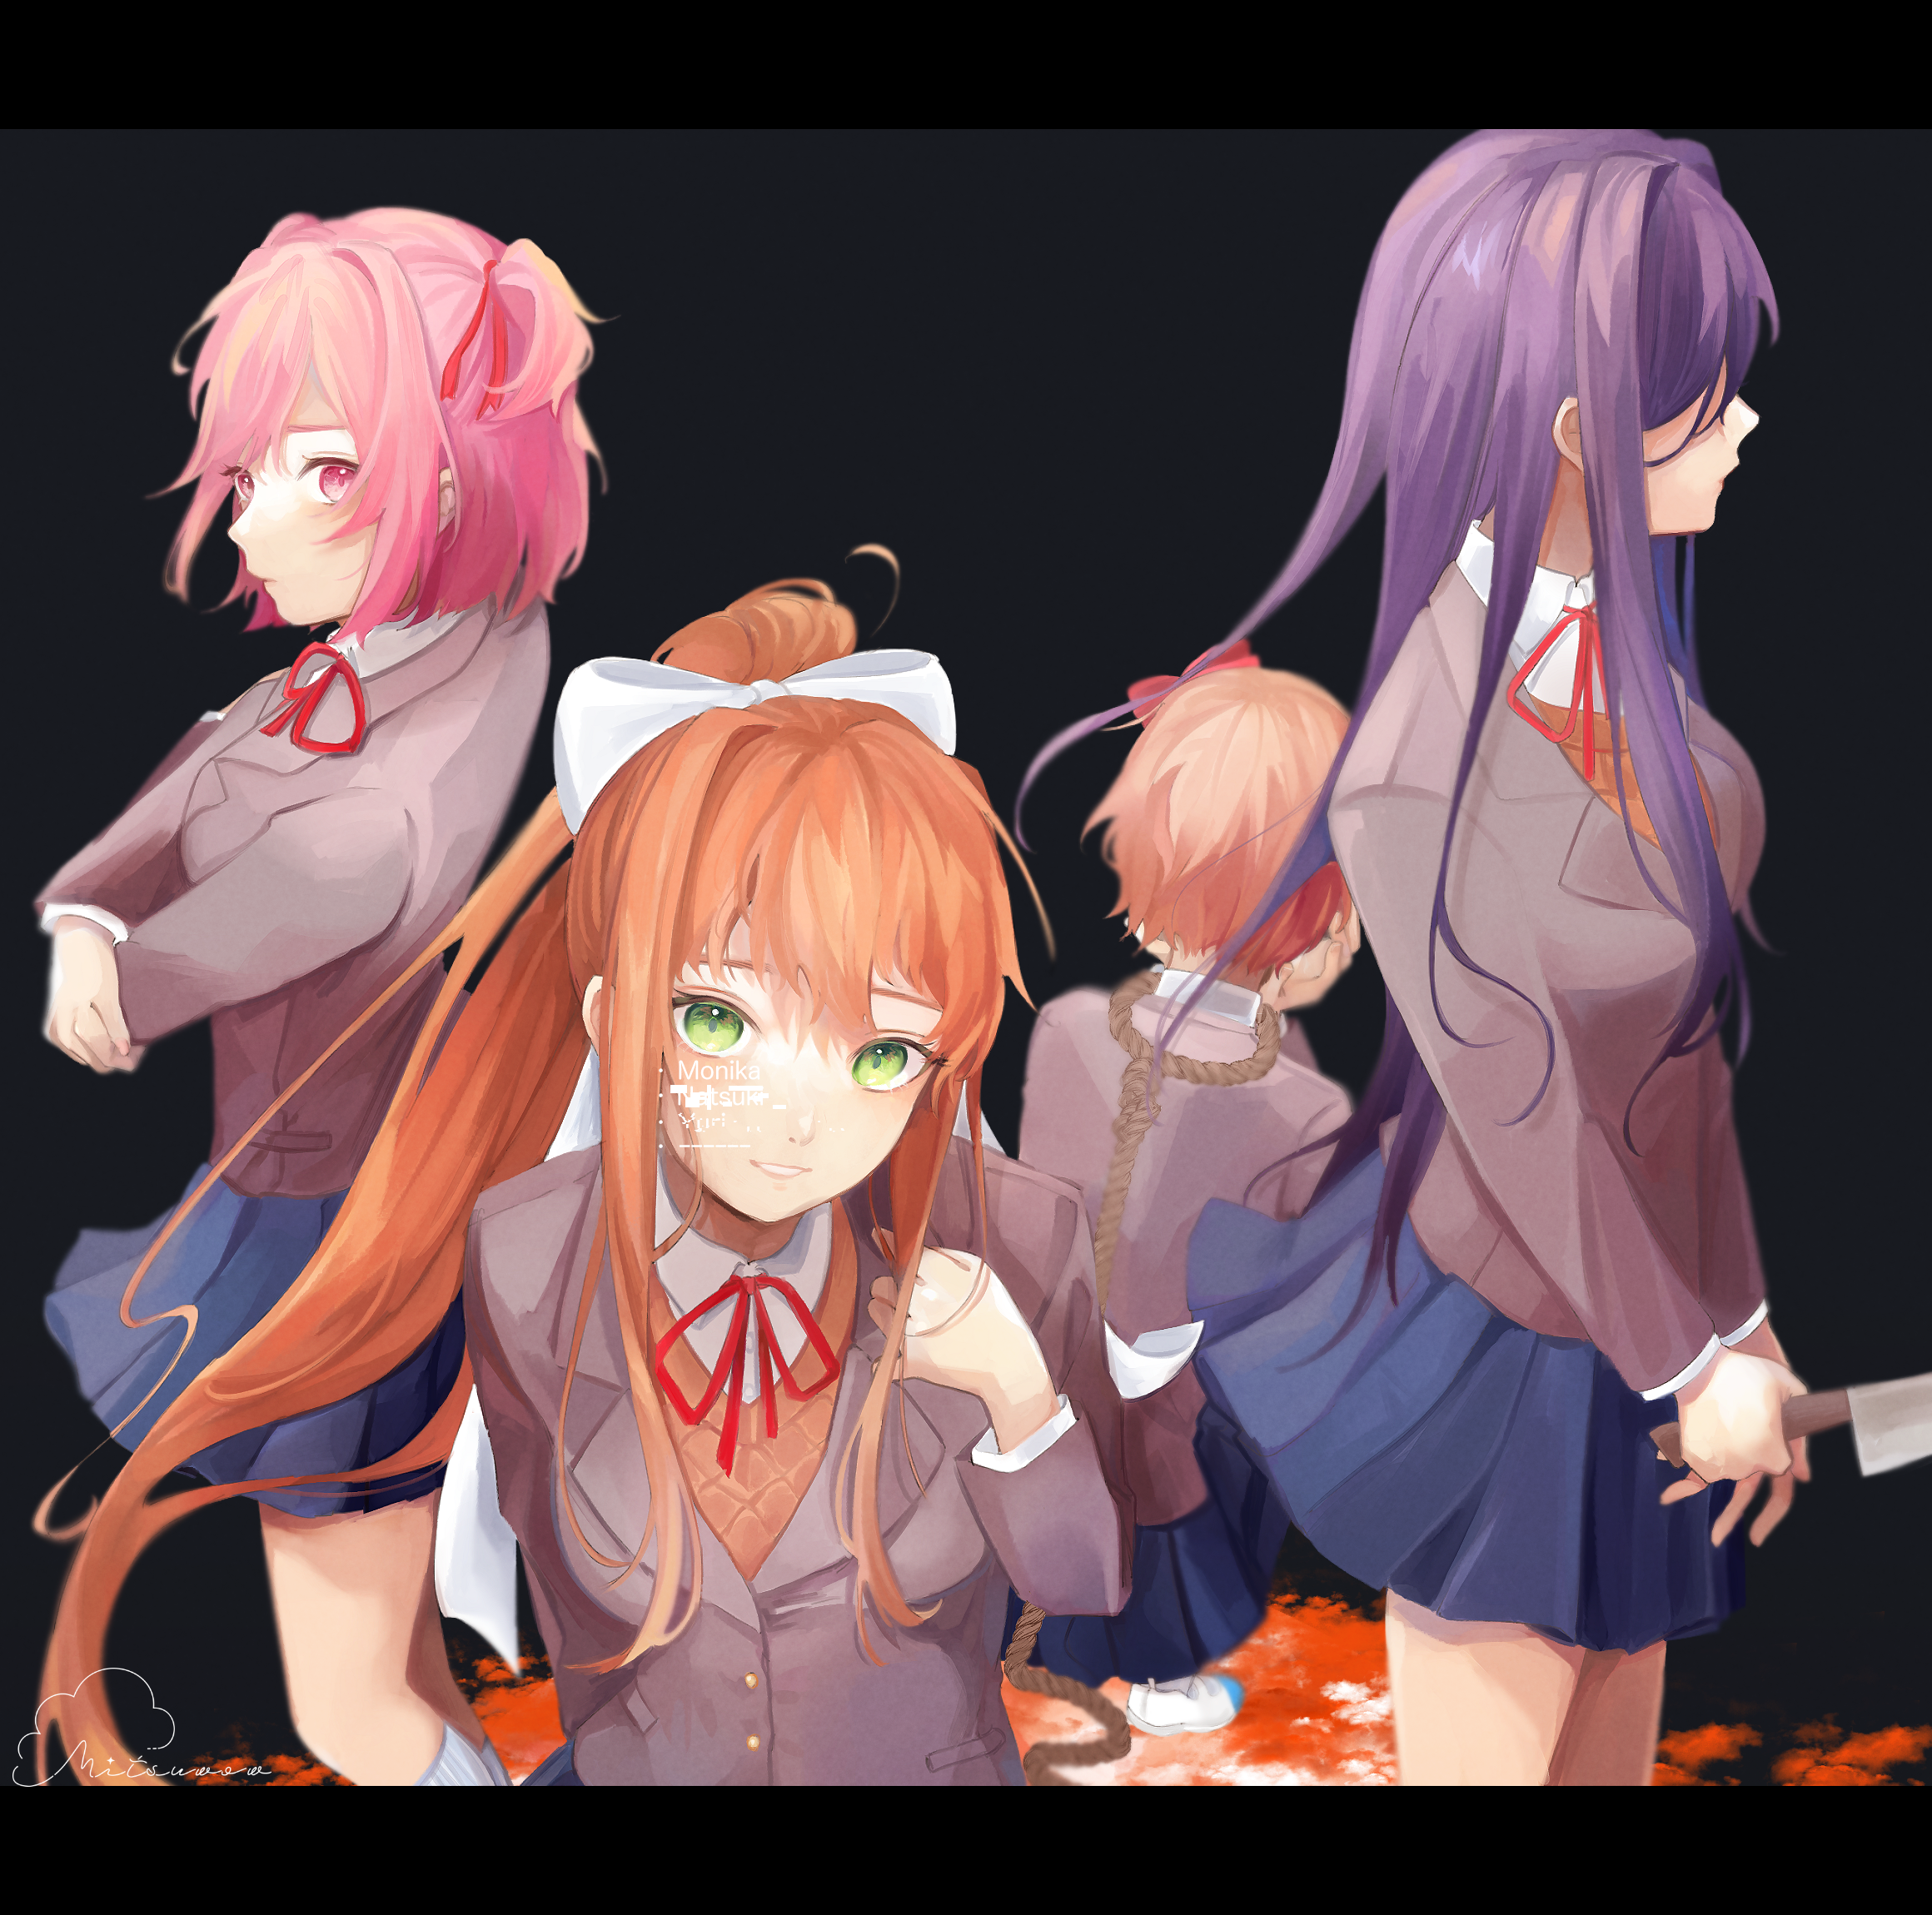 1366x768 Doki Doki Literature Club Anime 1366x768 Resolution HD 4k  Wallpapers Images Backgrounds Photos and Pictures